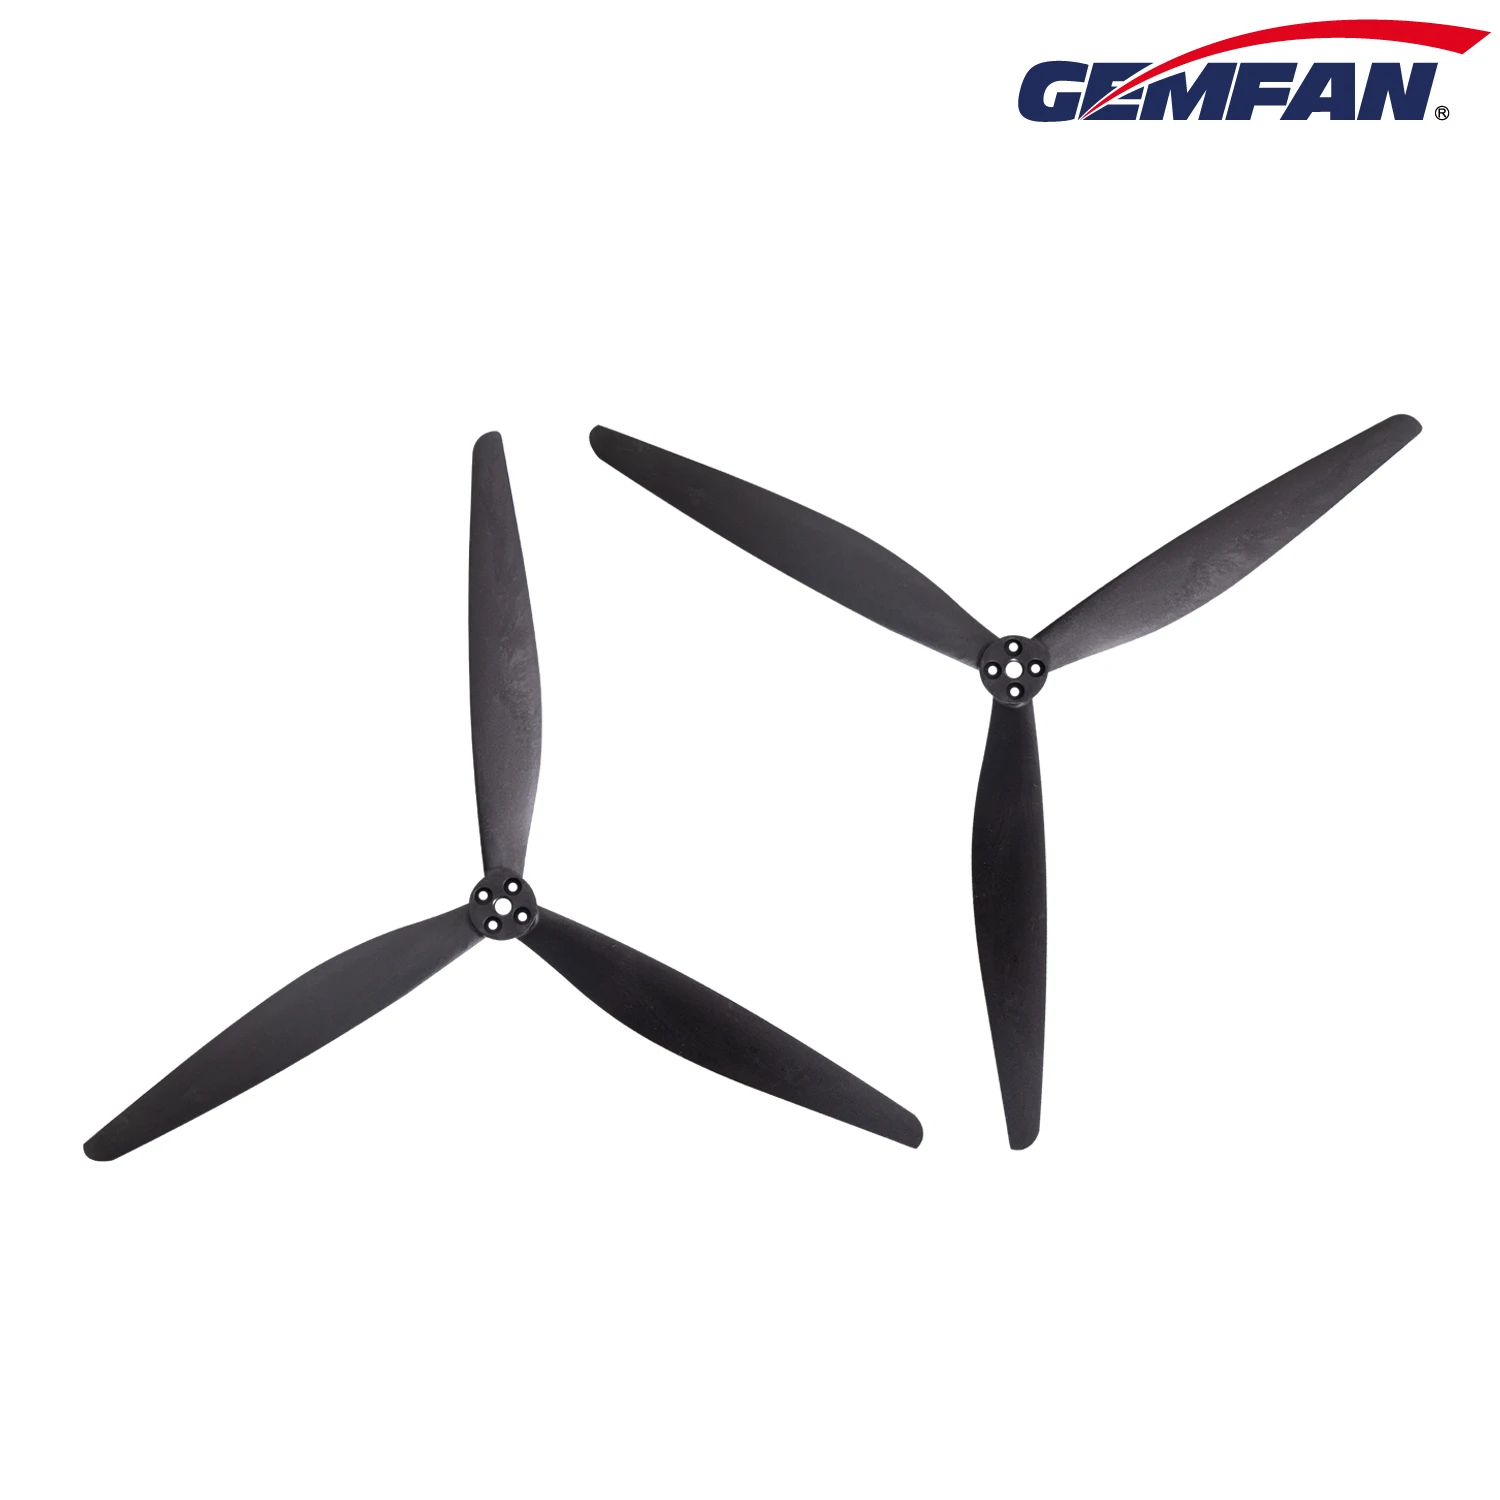 

Gemfan X CLASS 1308-3 High Efficiency Propeller 5310-400kv 3 Blade Props FPV Racing Freestyle and Cinelifter Adapter